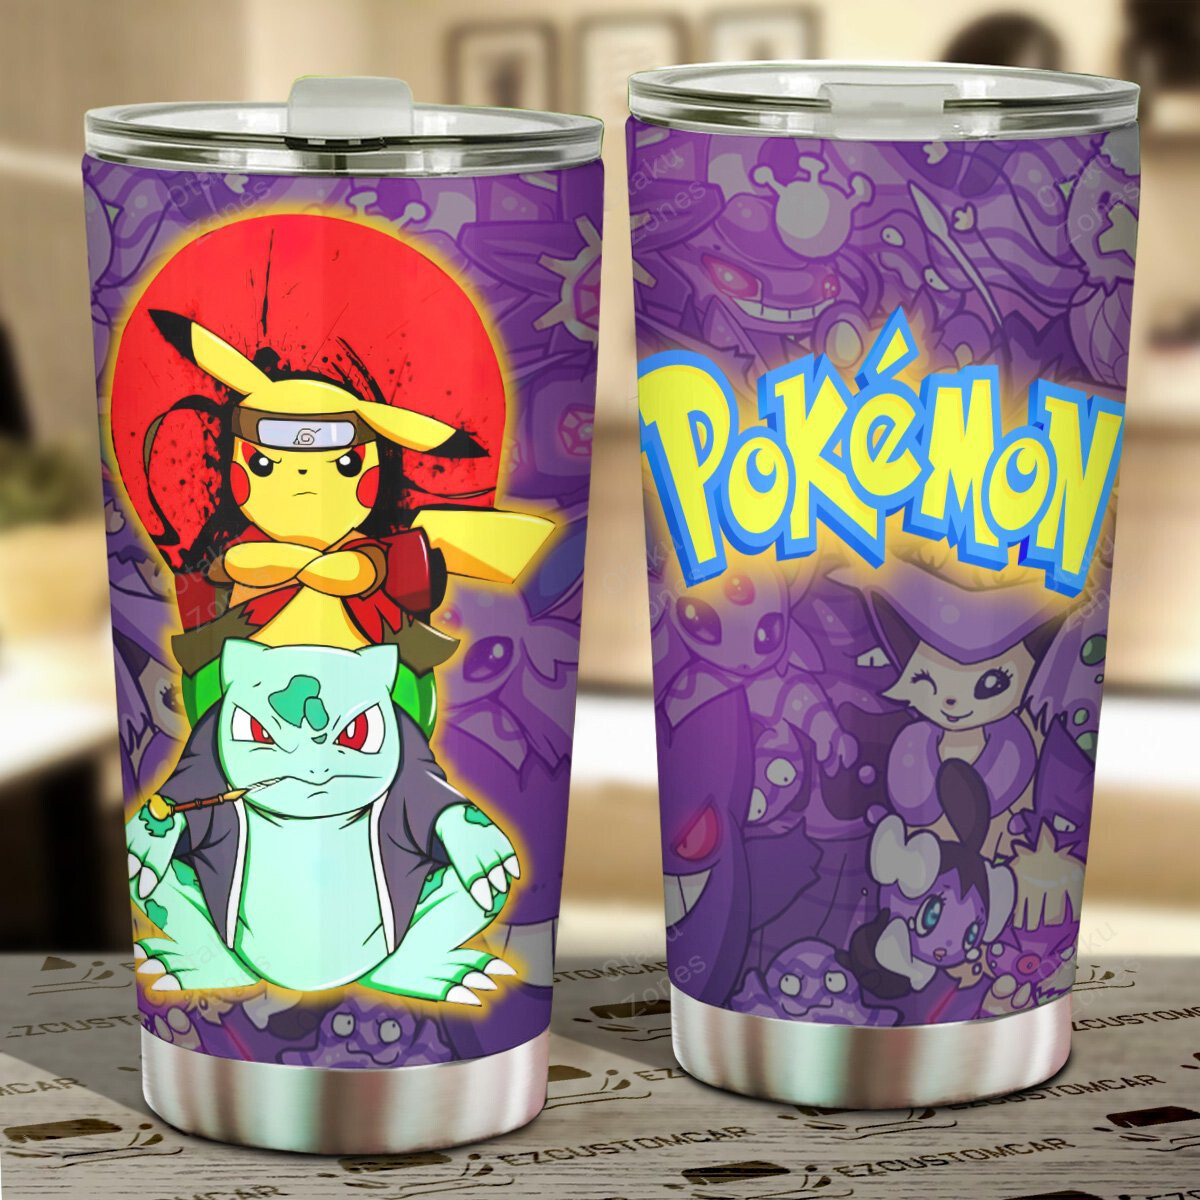 Go ahead and order your new tumbler now! 99